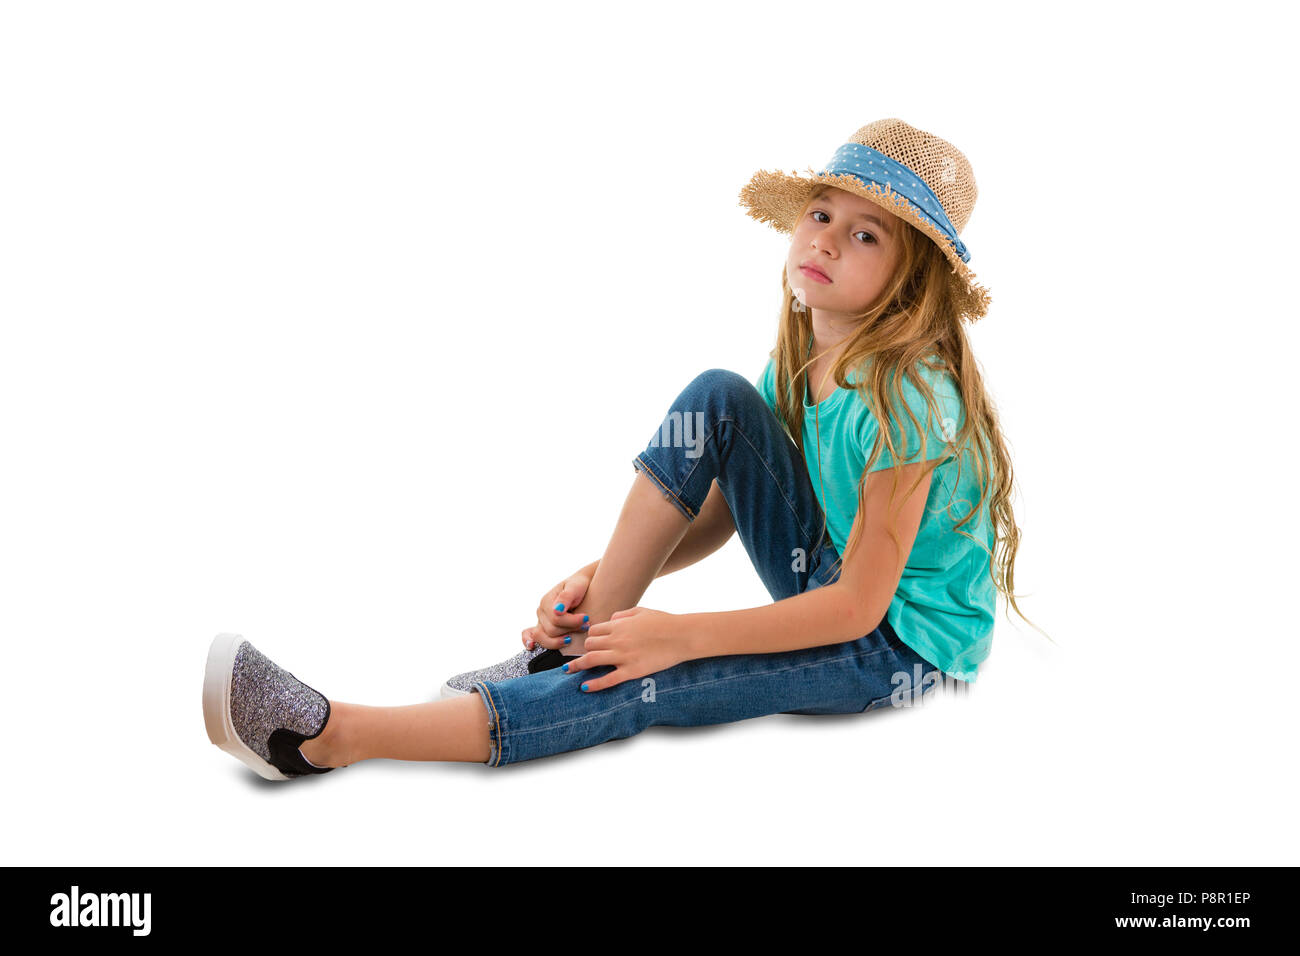 Solemn thoughtful little girl with long blond hair wearing a trendy straw hat sitting on the ground in a relaxed position watching the camera isolated Stock Photo